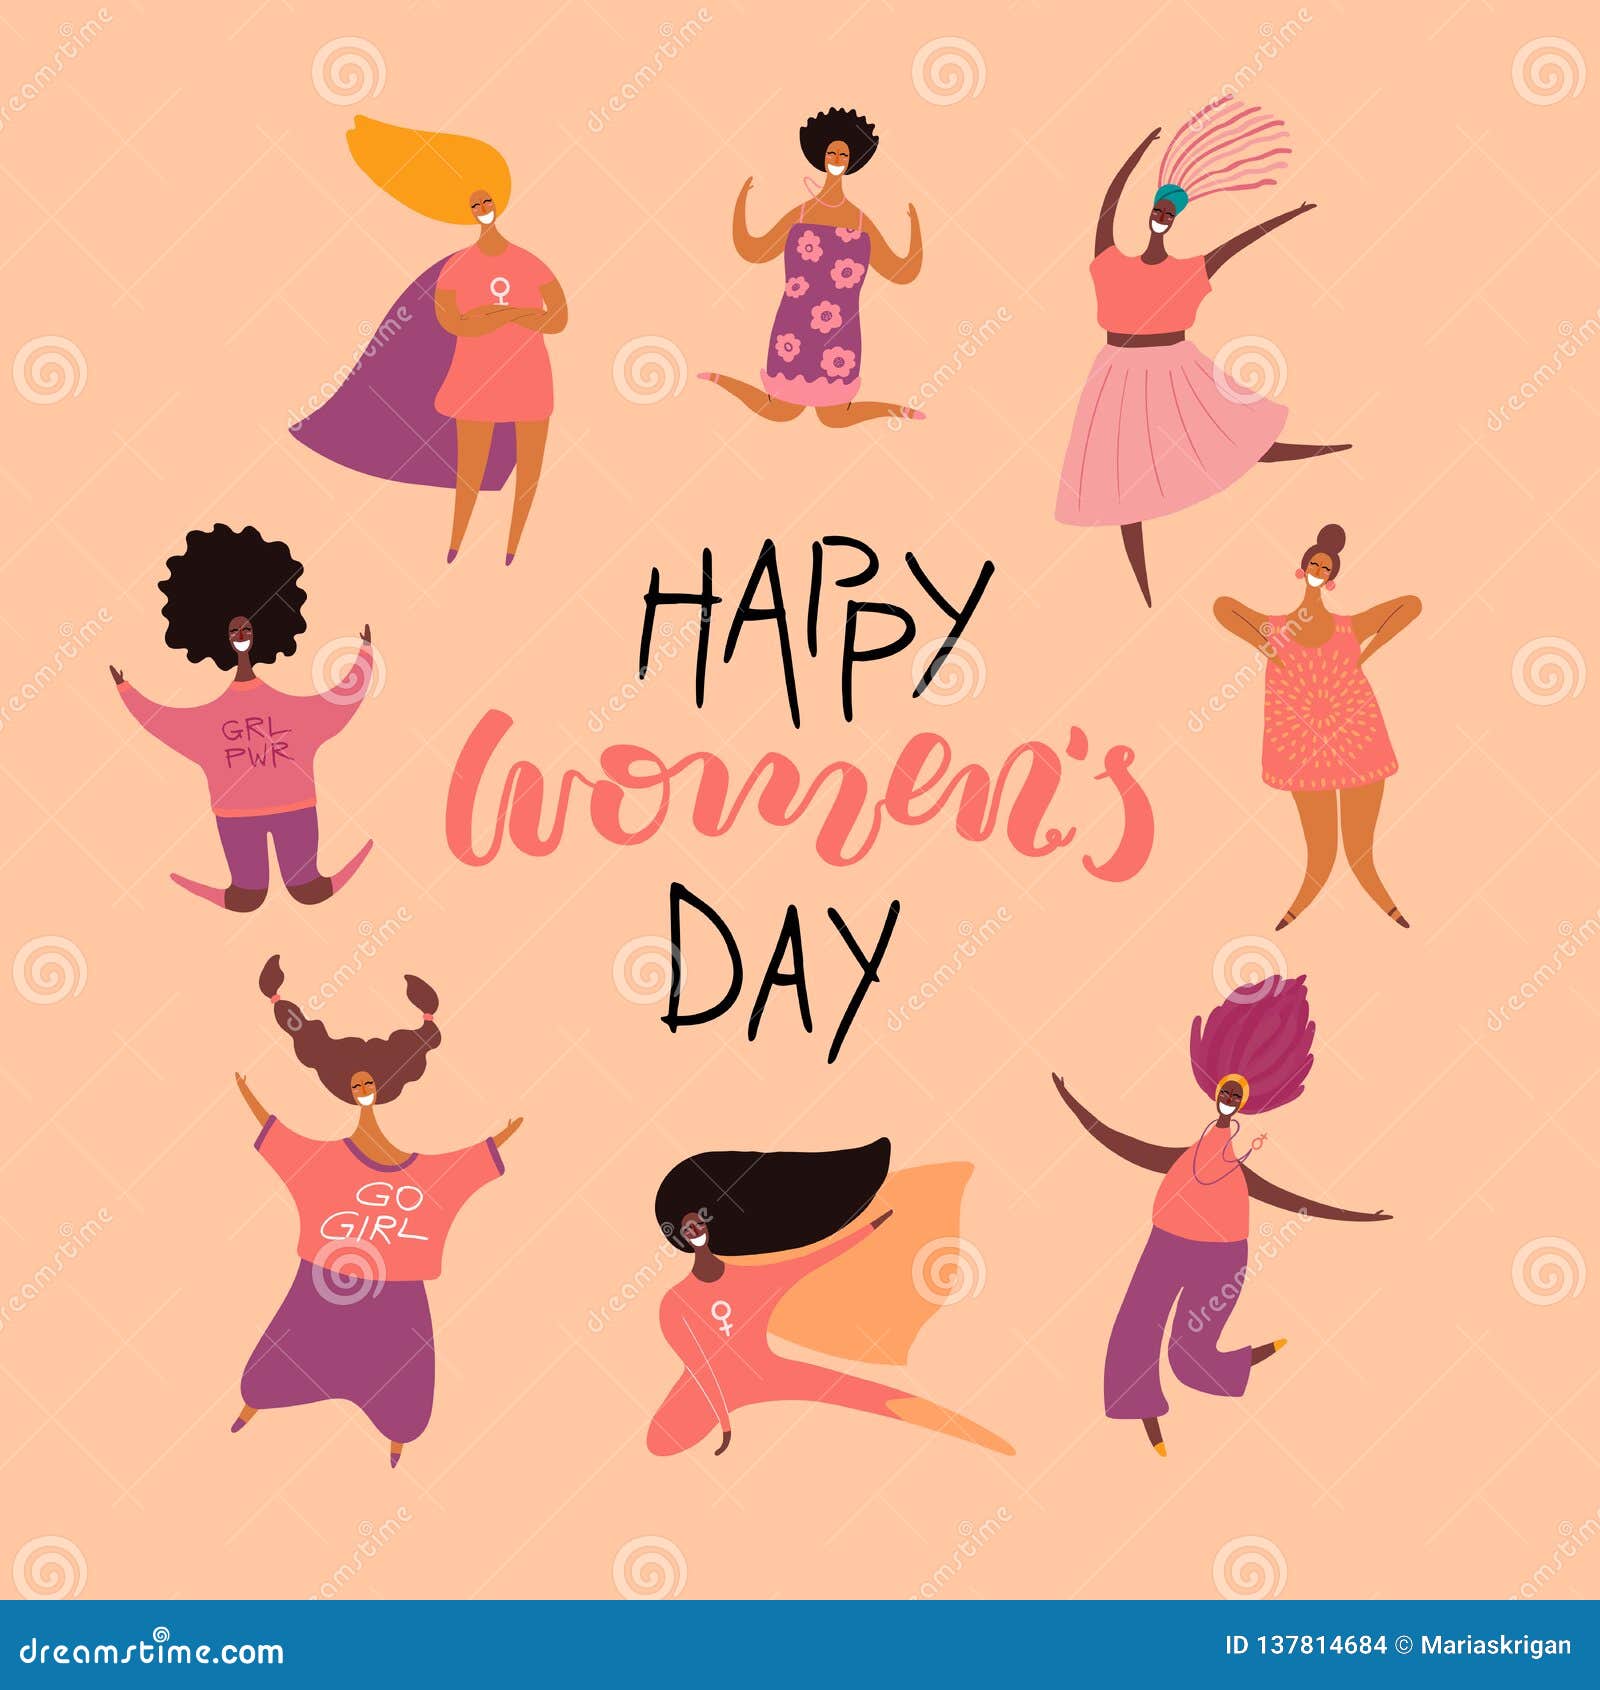 Happy womens day card stock vector. Illustration of feminism - 137814684